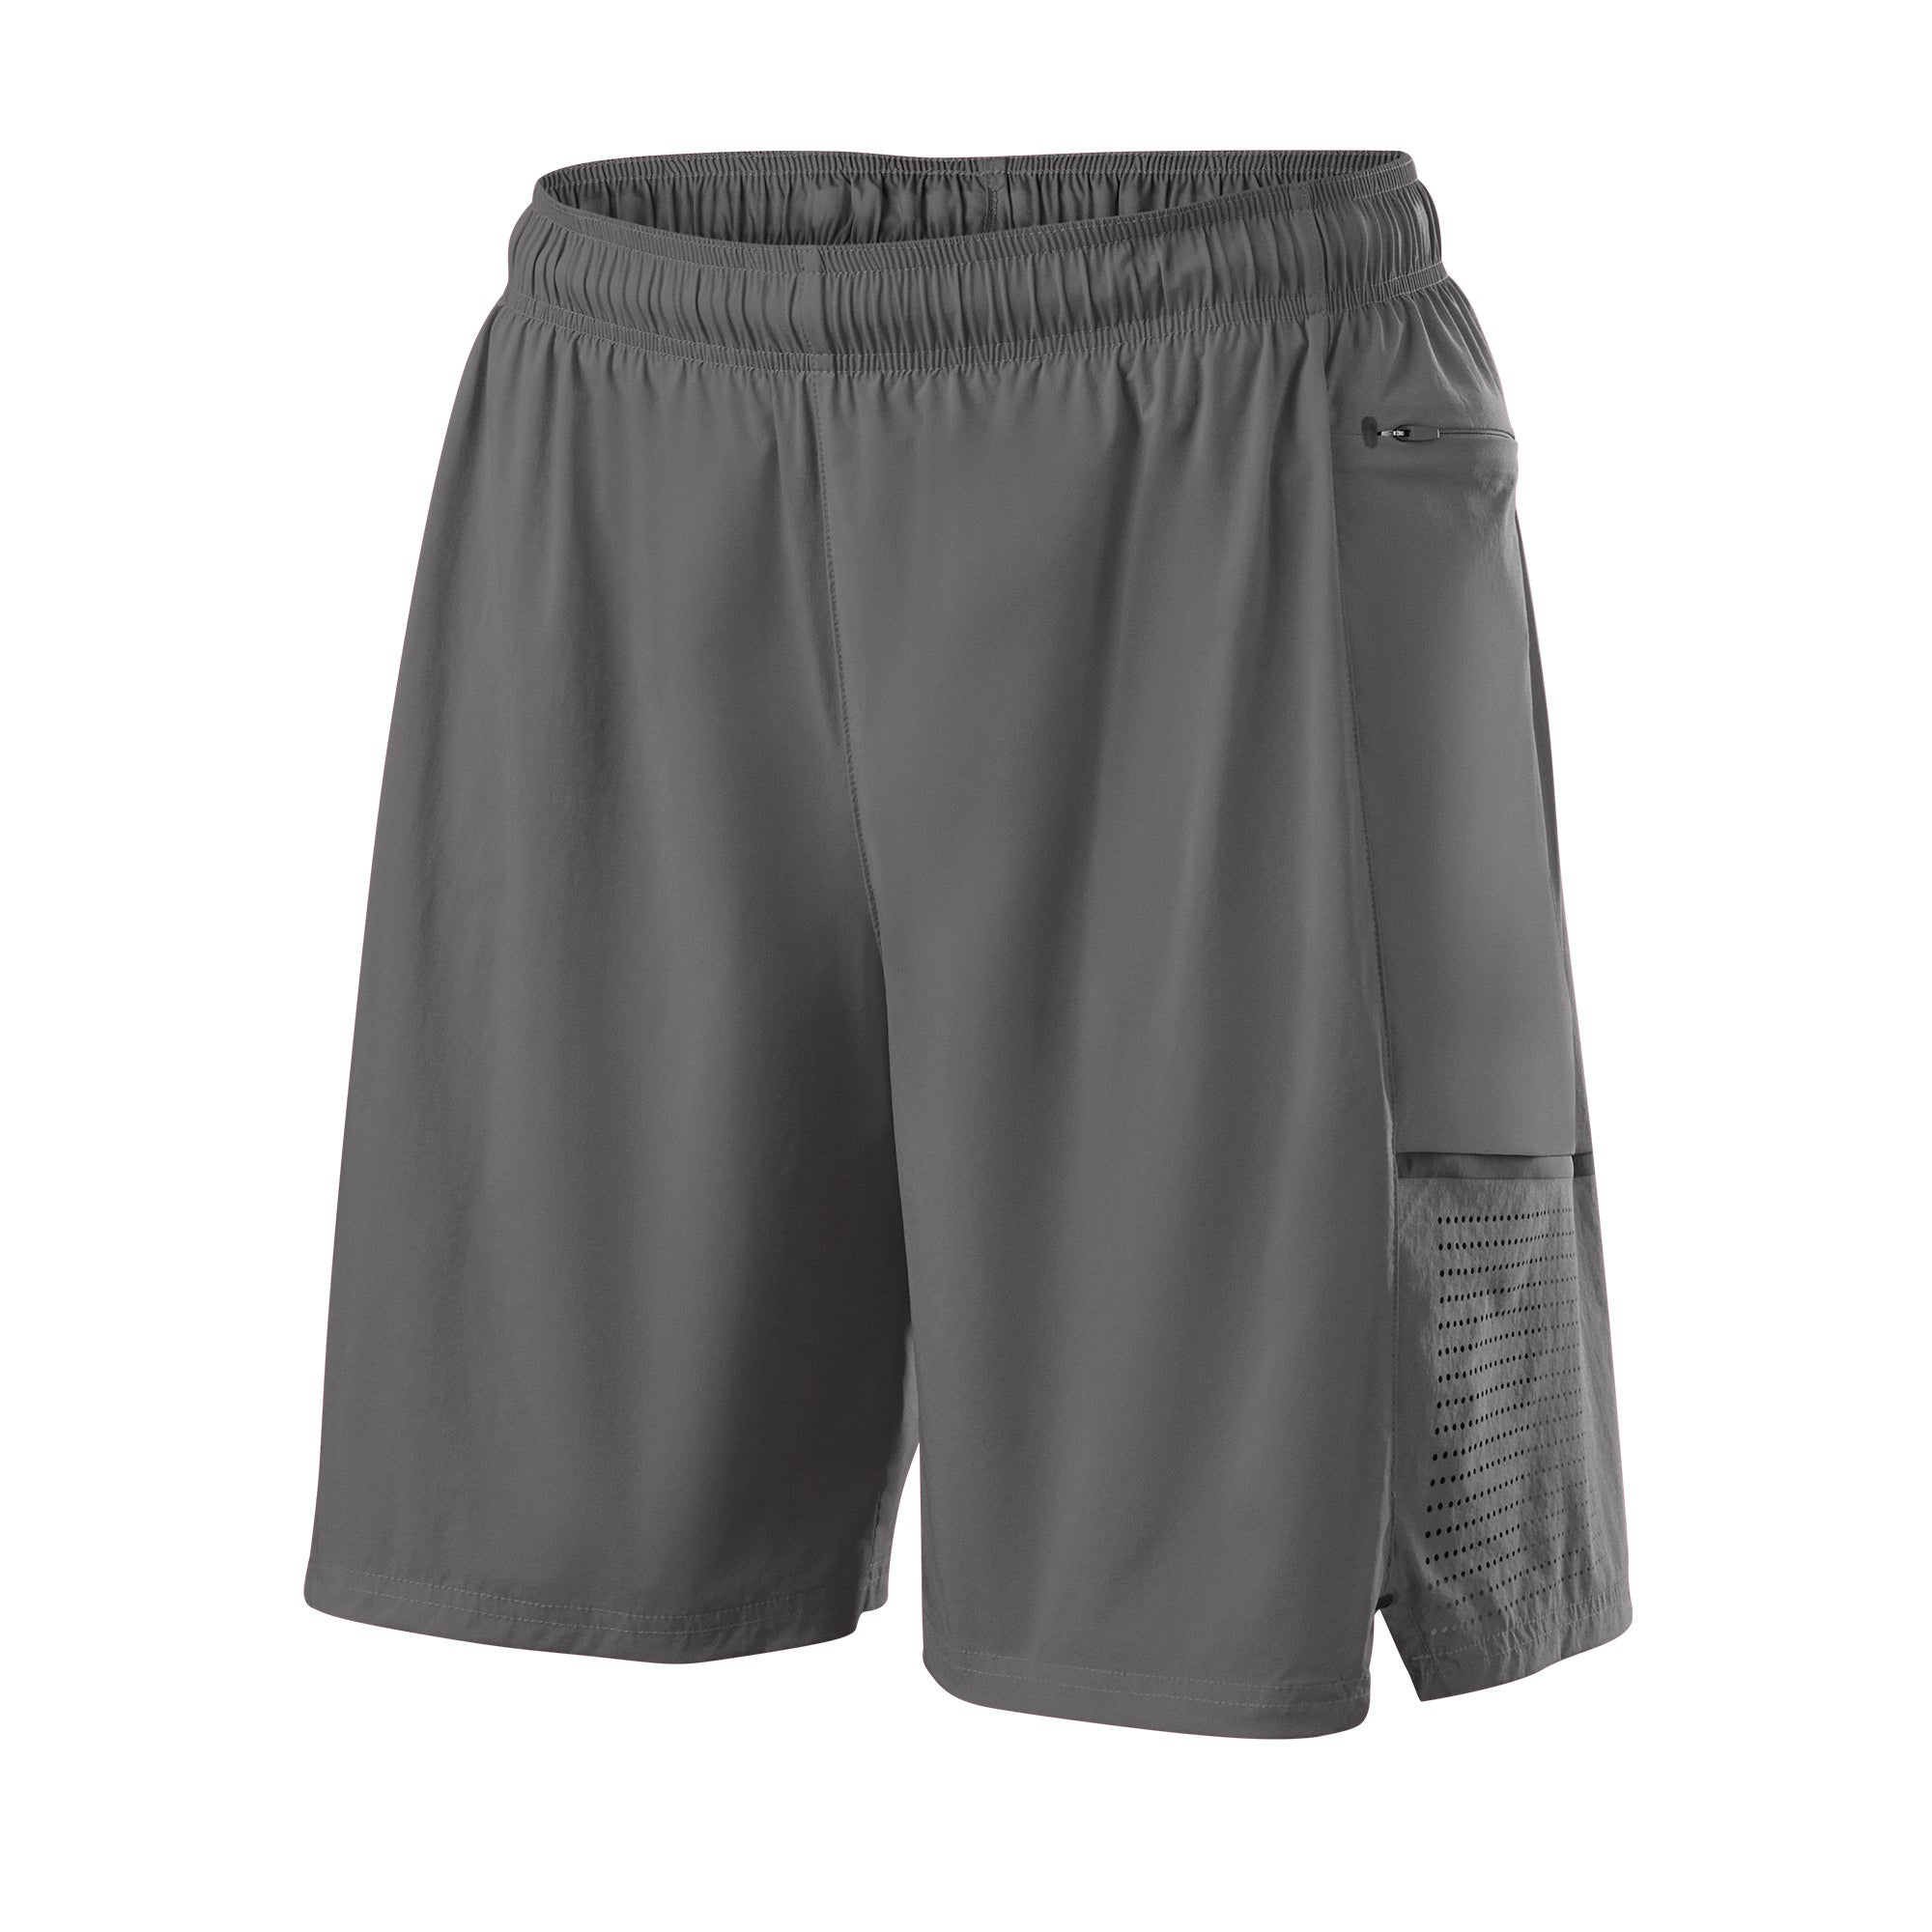 Evoshield Men's Game Changing 2-in-1 Short Charcoal